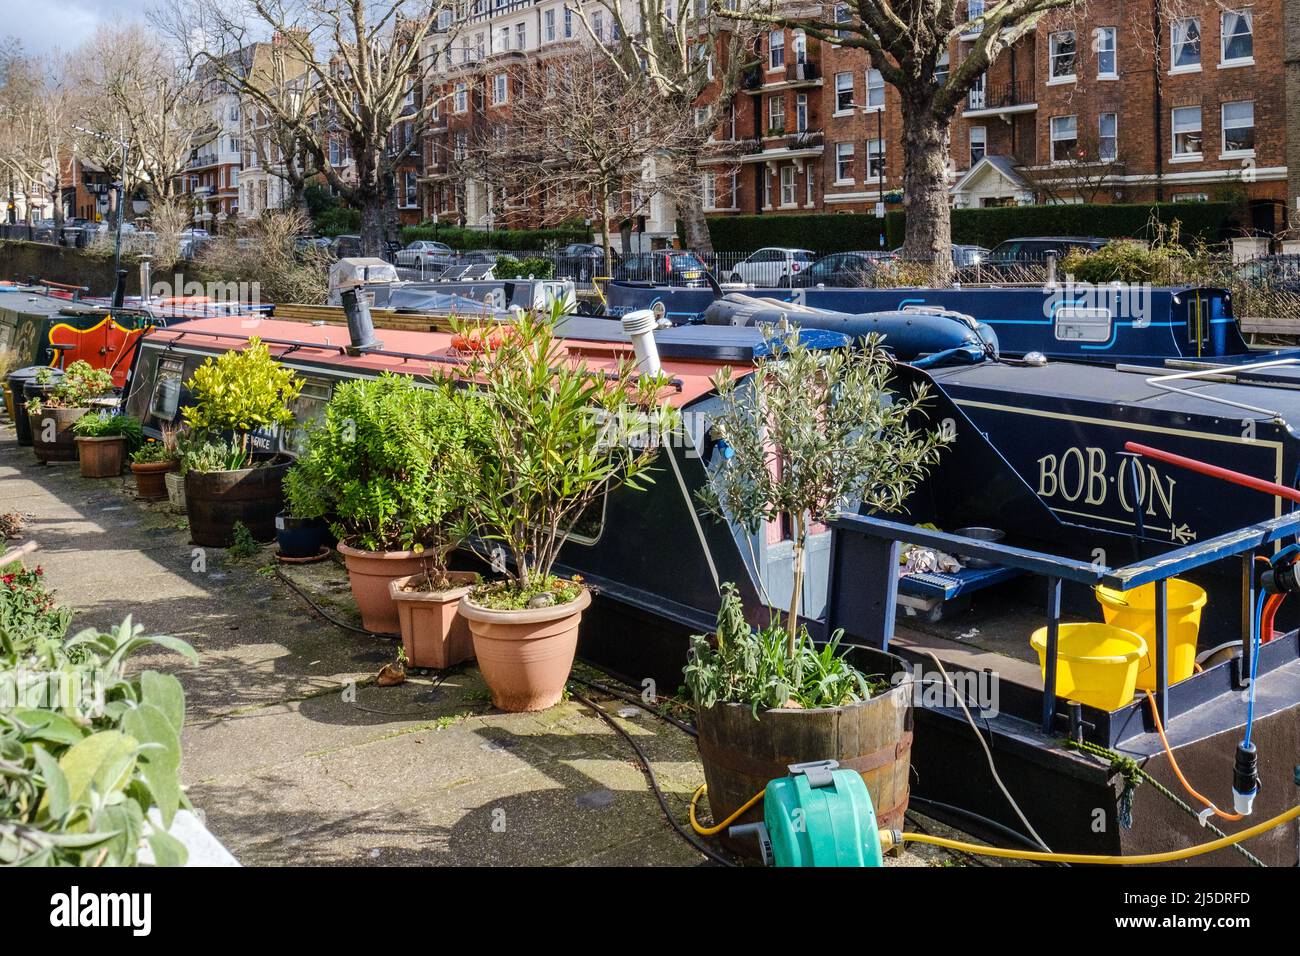 Narrowboats docked at Little Venice, Regent’s Canal, with Maida Avenue and a stately mansion block in the background, West London, England, UK. Stock Photo